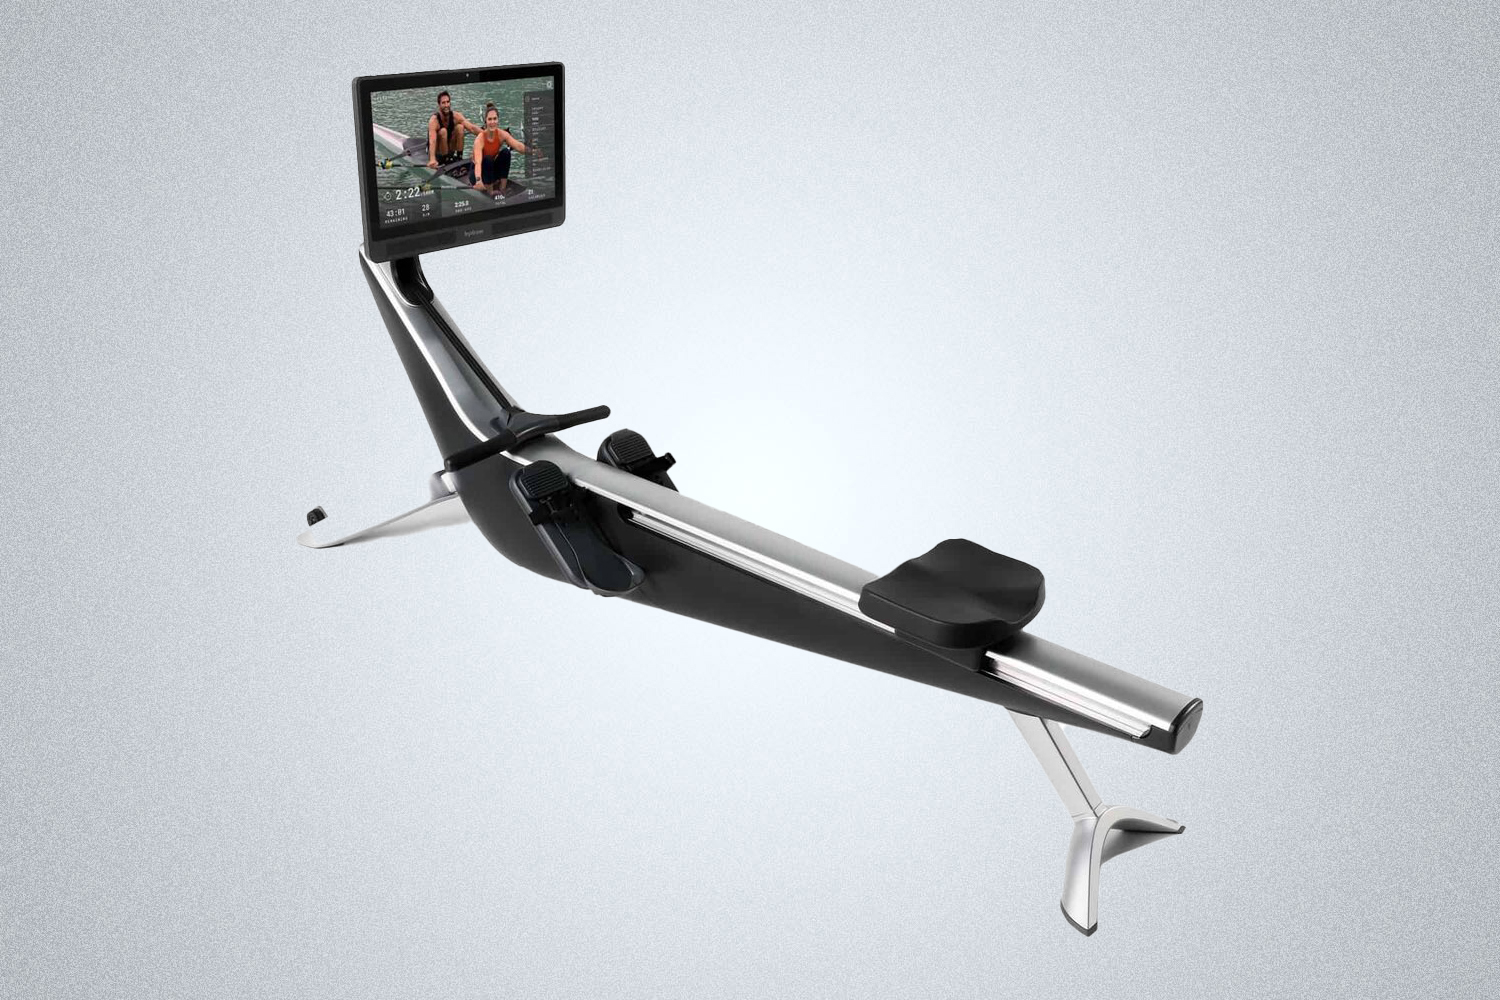 The Hydrow Personal Rowing Machine is one of the best fitness gifts to give in 2021 for home workouts away from the gym membership